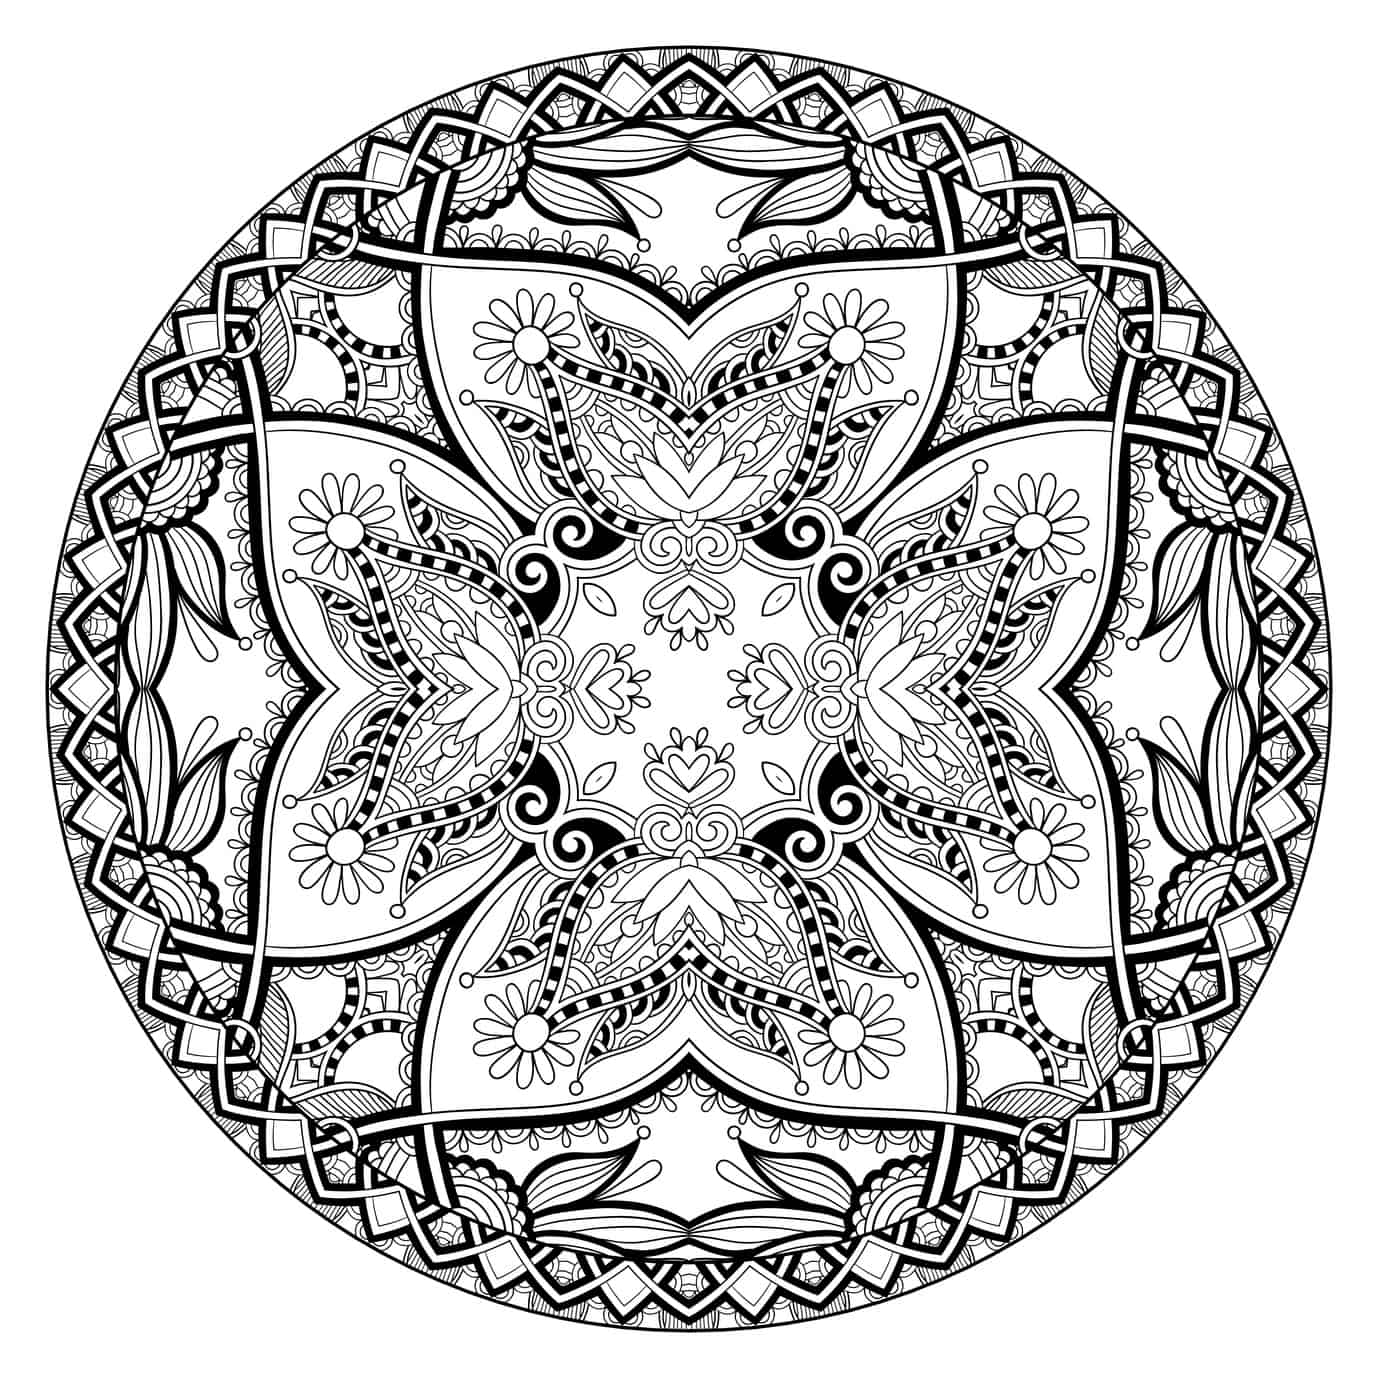 These Printable Abstract Coloring Pages Relieve Stress And Help You